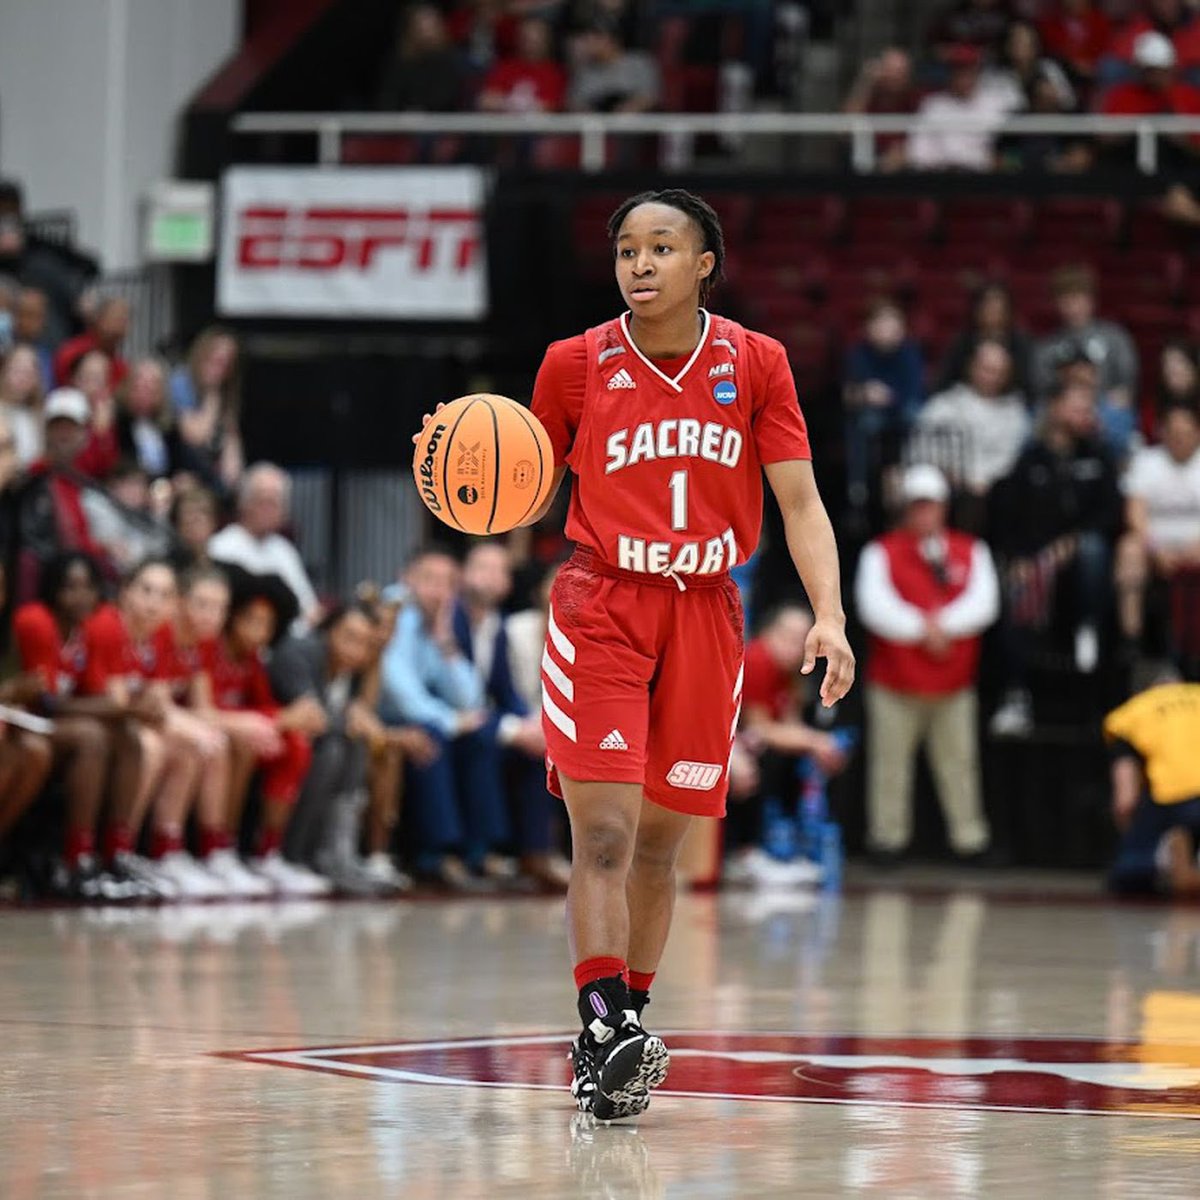 Ny’Ceara Pryor (@NyCeara) led @SacredHeartWBB to a 76-47 victory against St. Francis:

15 pts | 6 rebs | 2 asts | 3 stls
#NCAAWBB